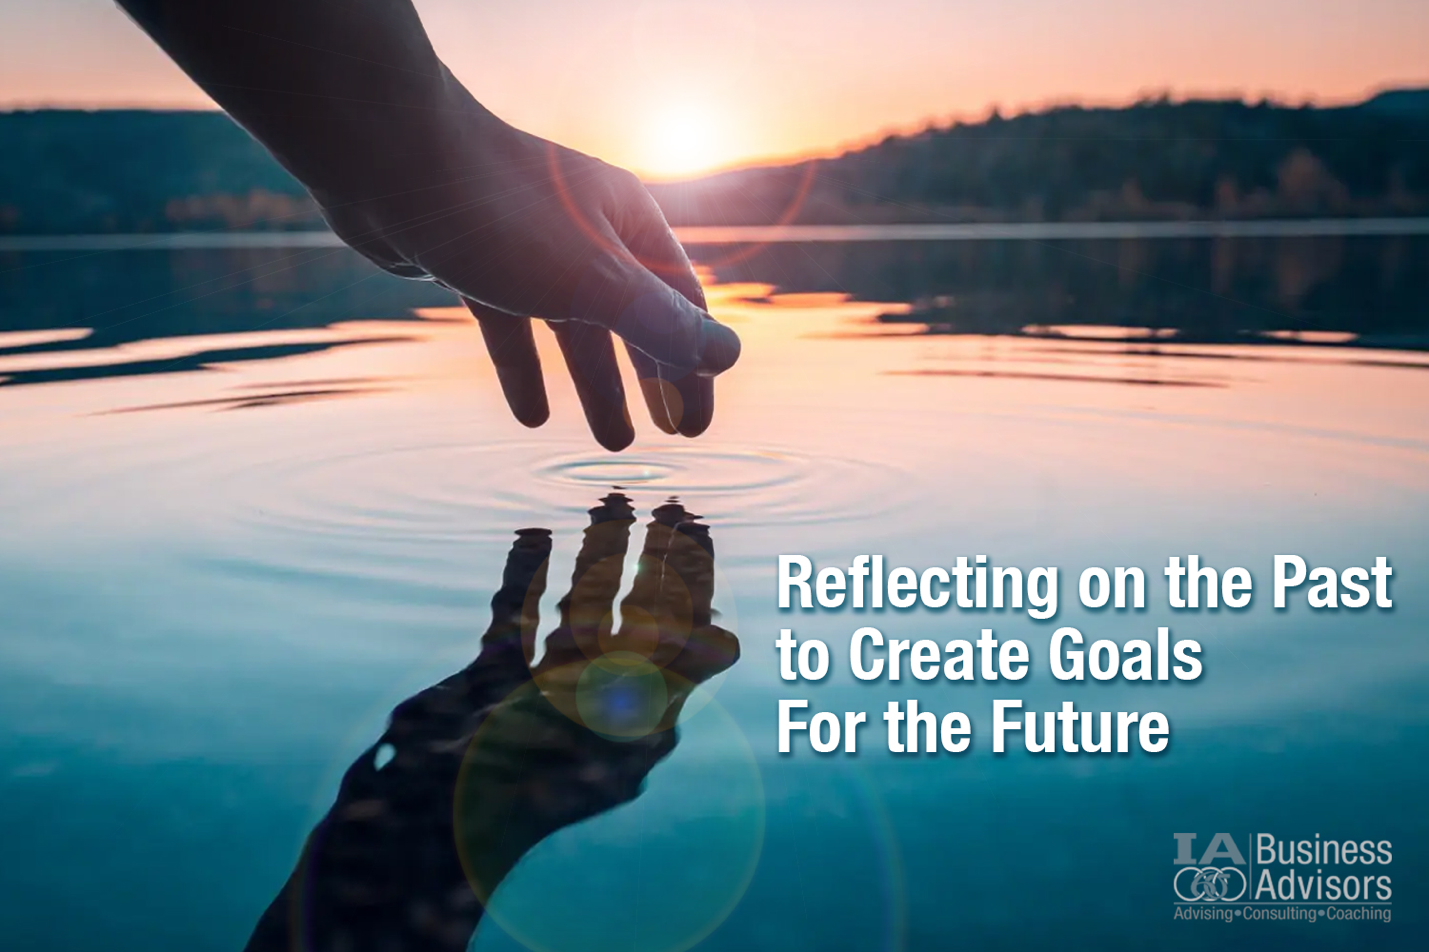 Reflecting on the Past to Create Goals for the Future